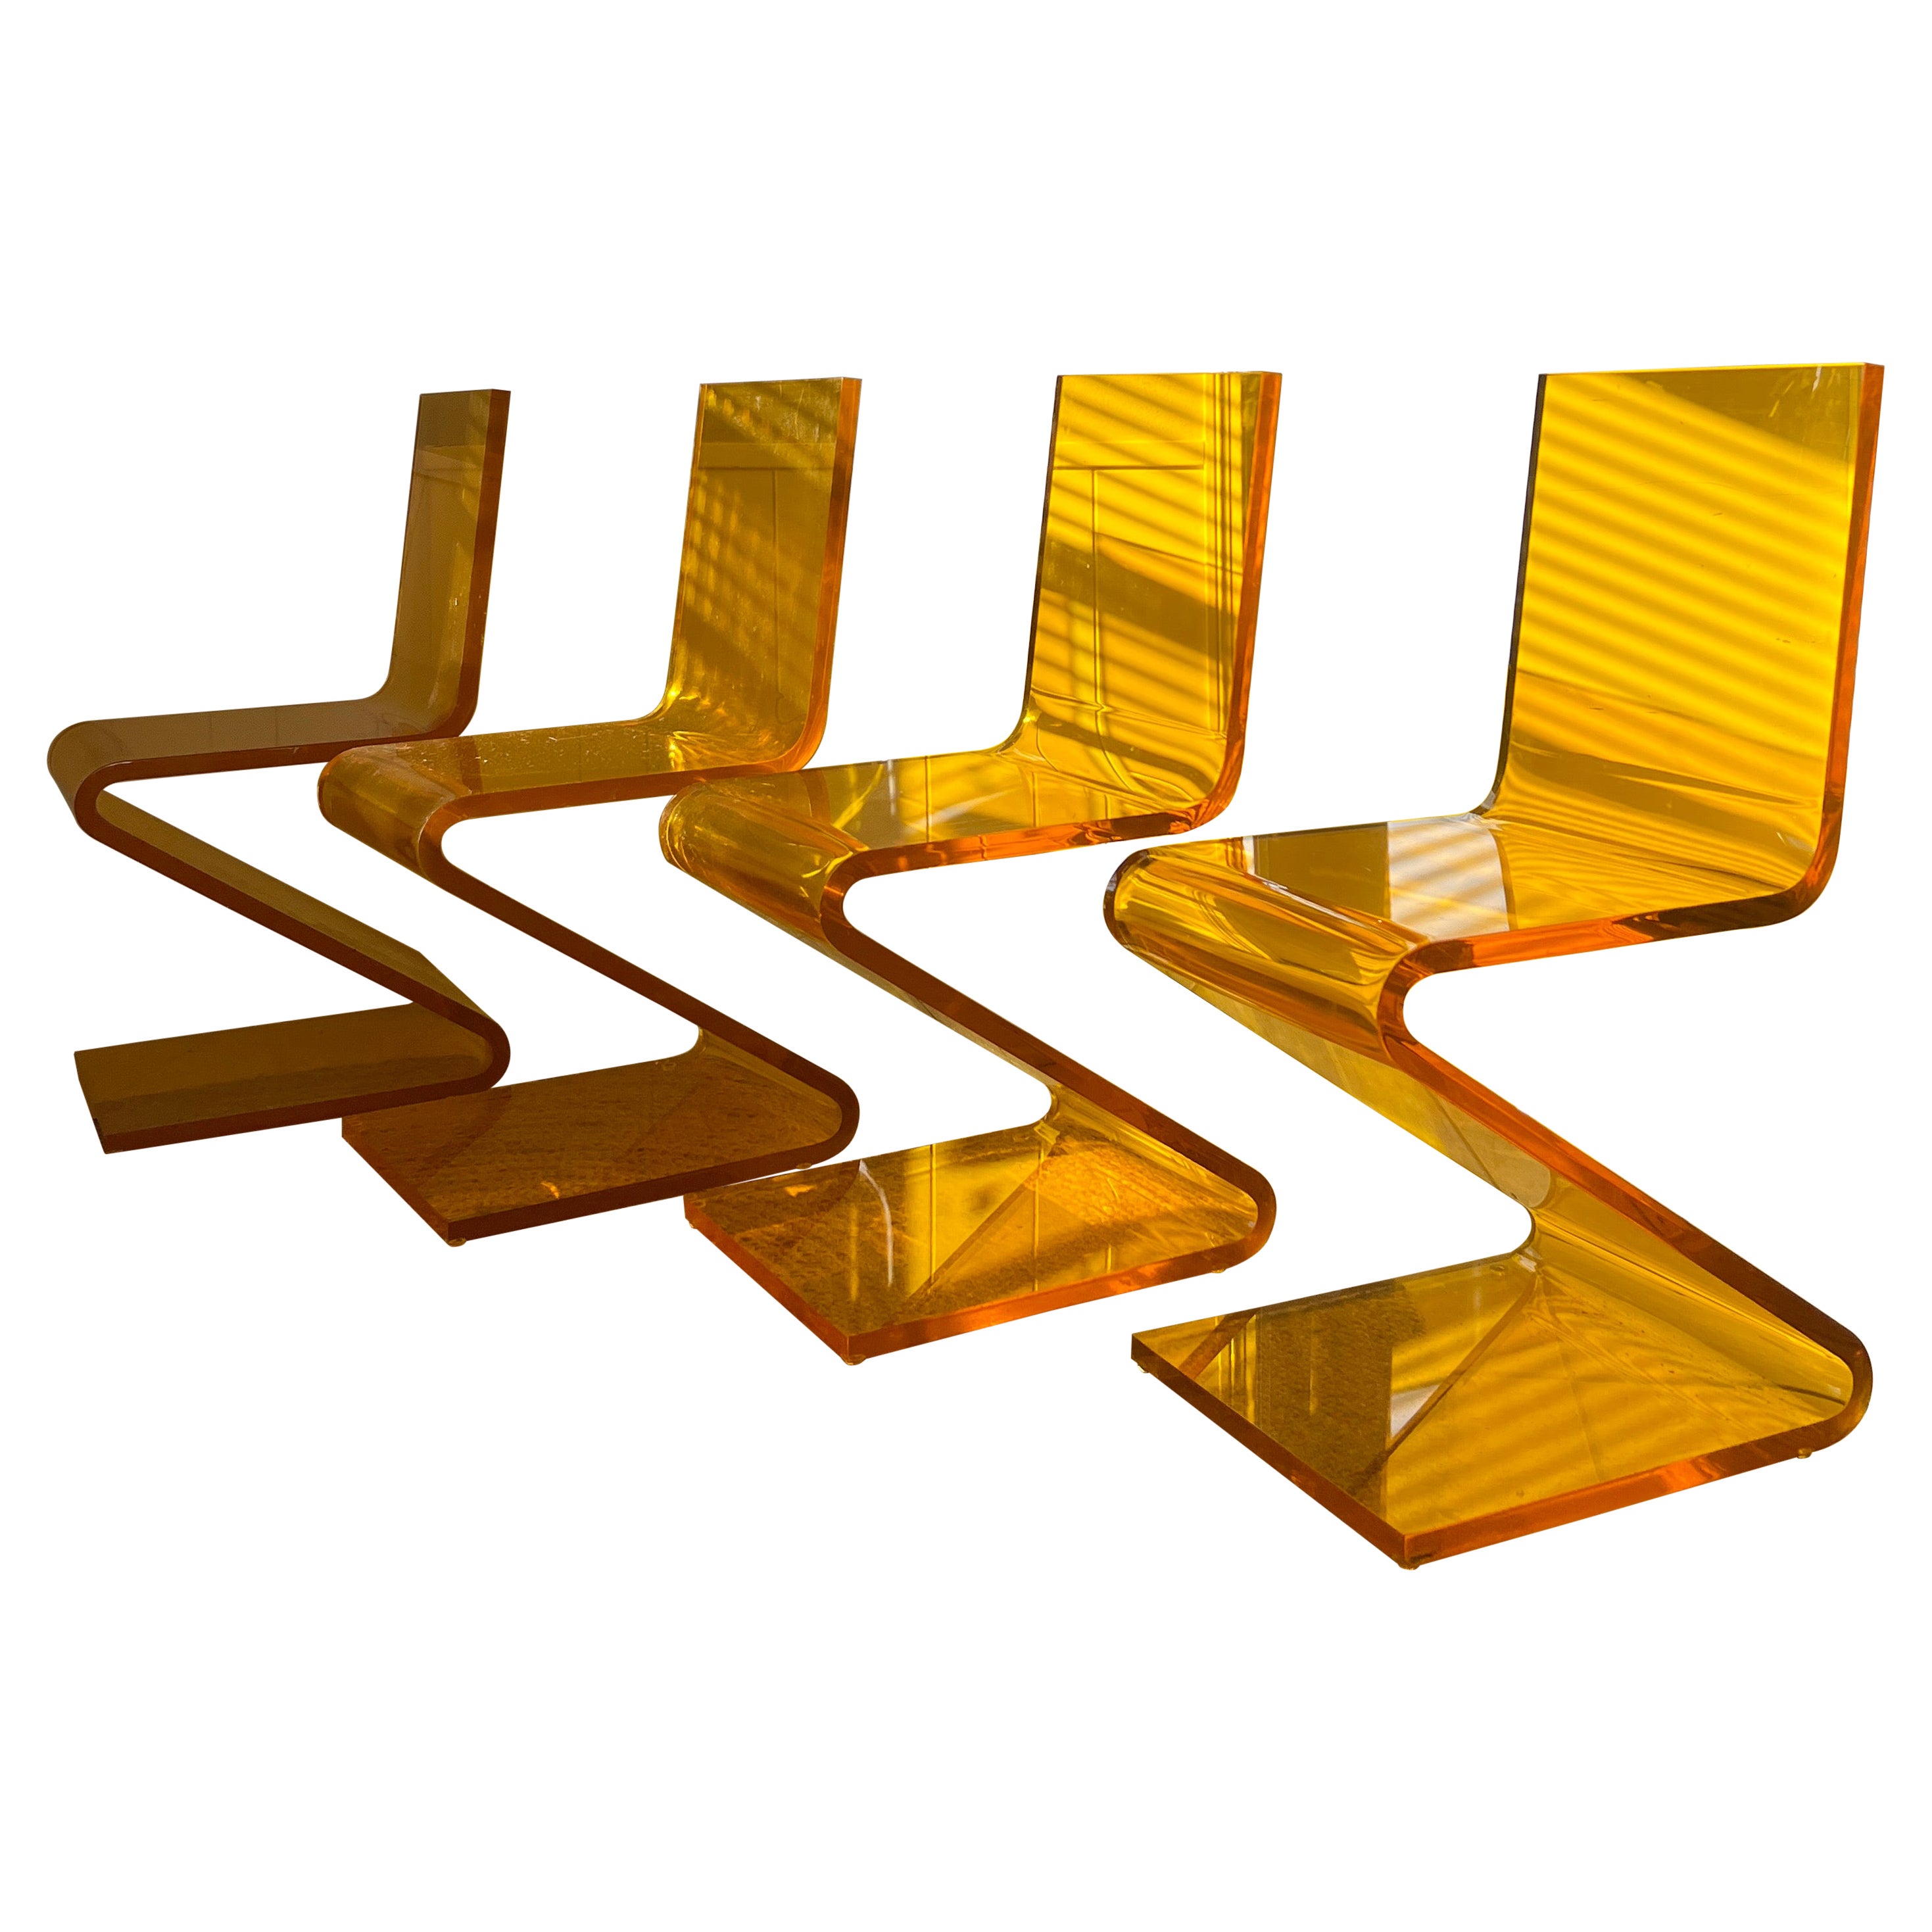 A set of four Z chairs by Haziza in a 1” thick lucite orange color For Sale